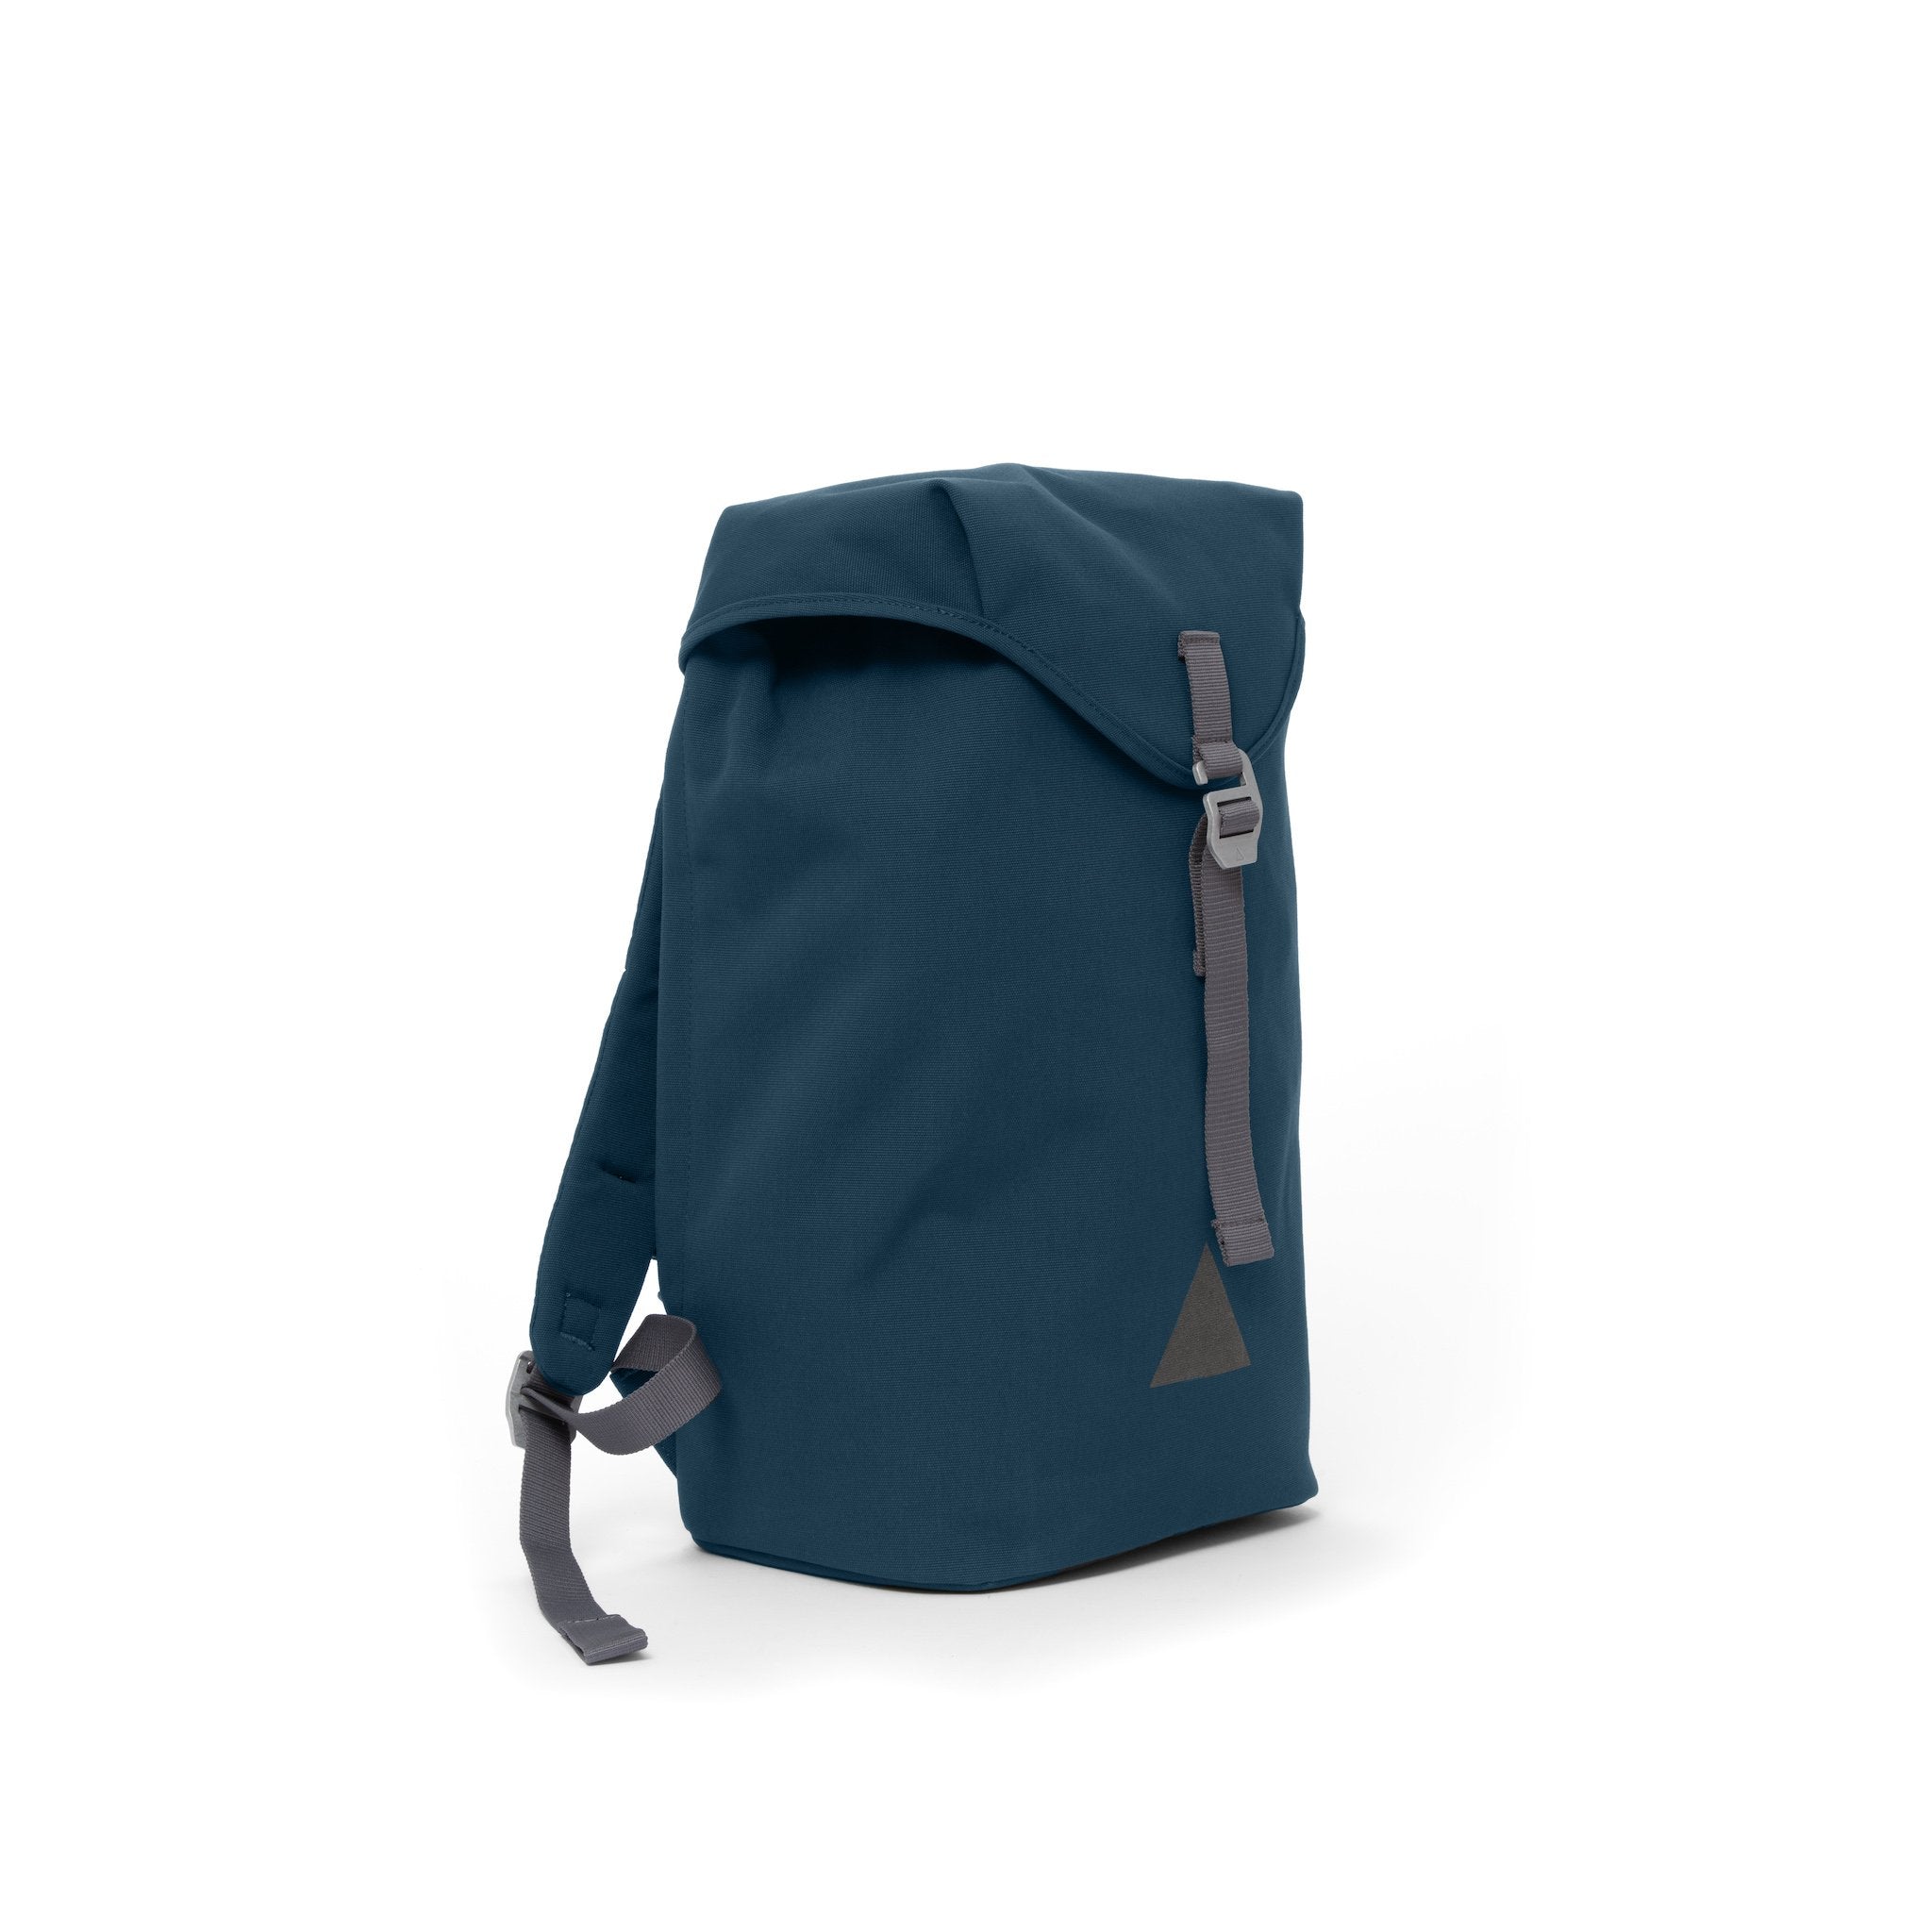 Blue recycled canvas backpack with strap closure and metal buckle.